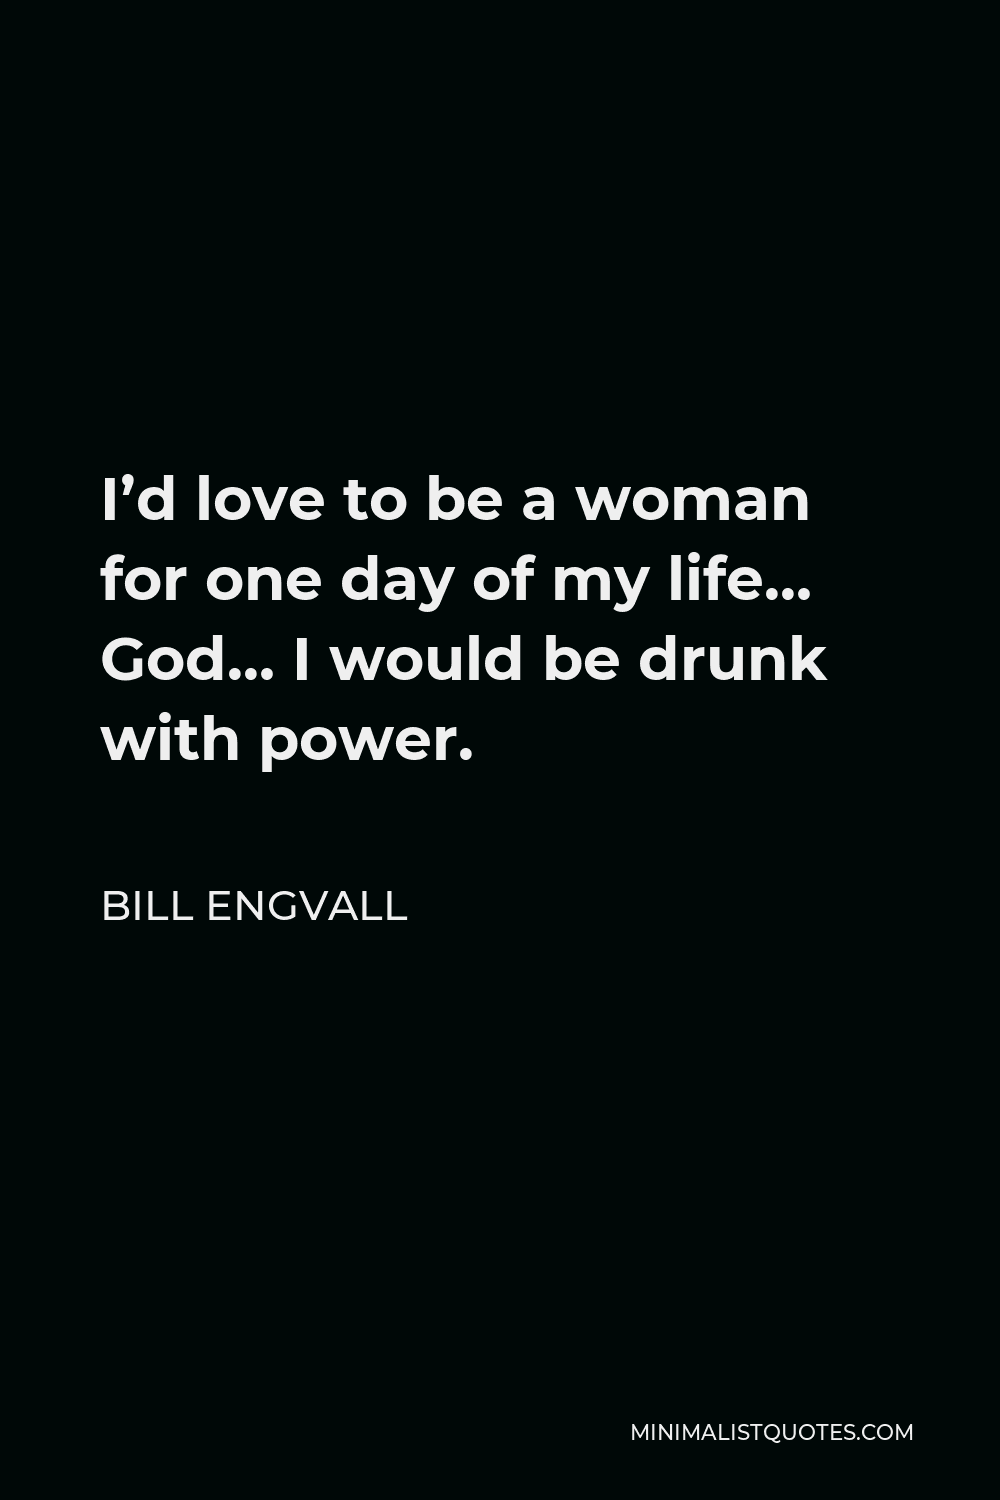 Bill Engvall Quote - I’d love to be a woman for one day of my life… God… I would be drunk with power.